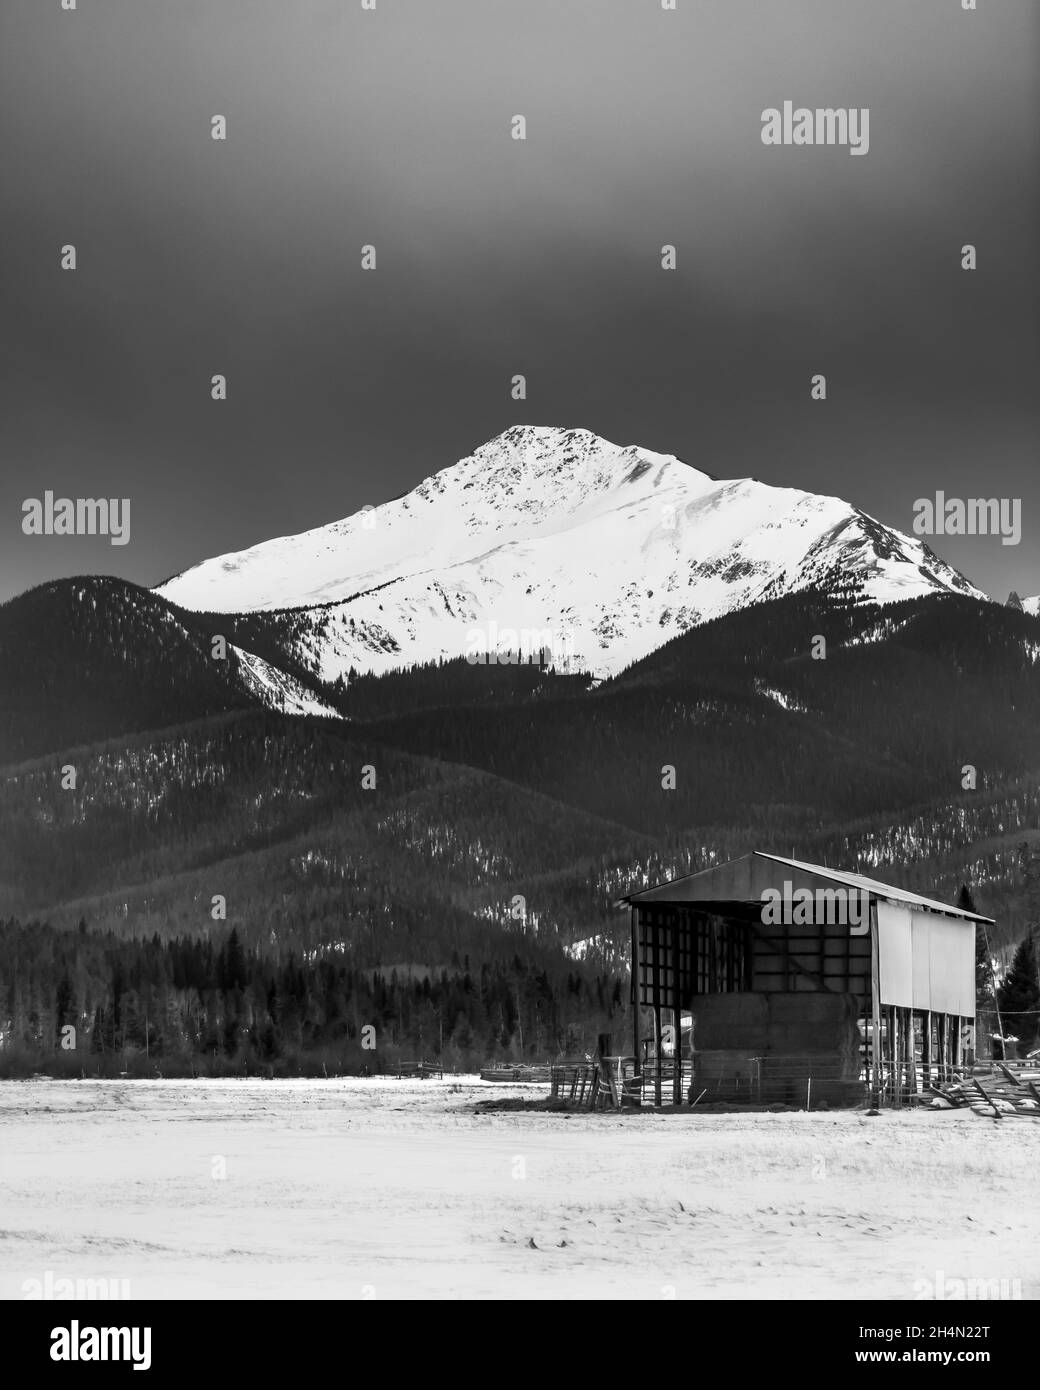 A snow capped peak (Byers Peak) towers above a hay barn of a ranch in the valley below Stock Photo